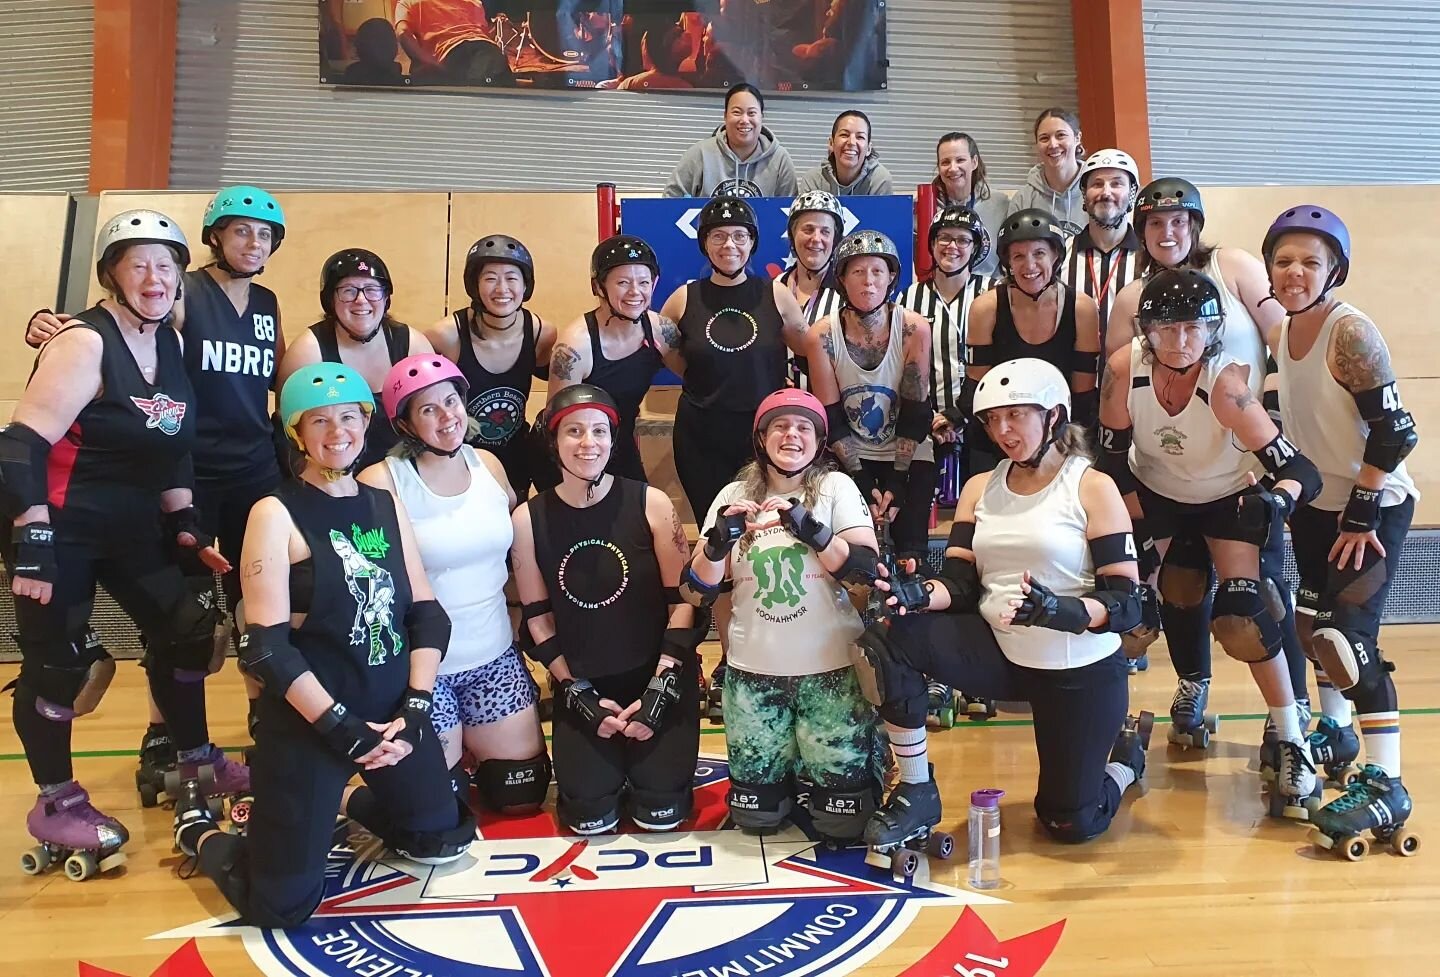 Thank you @western_sydney_rollers and @southsidederby for coming out for a super fun scrim with our Sirens today! Shout out to the refs who pointed and tooted at us, and our derby-skillers (and Priss!) who nso'd. 💪❤️ #rollerderby #rollerderbylove #s